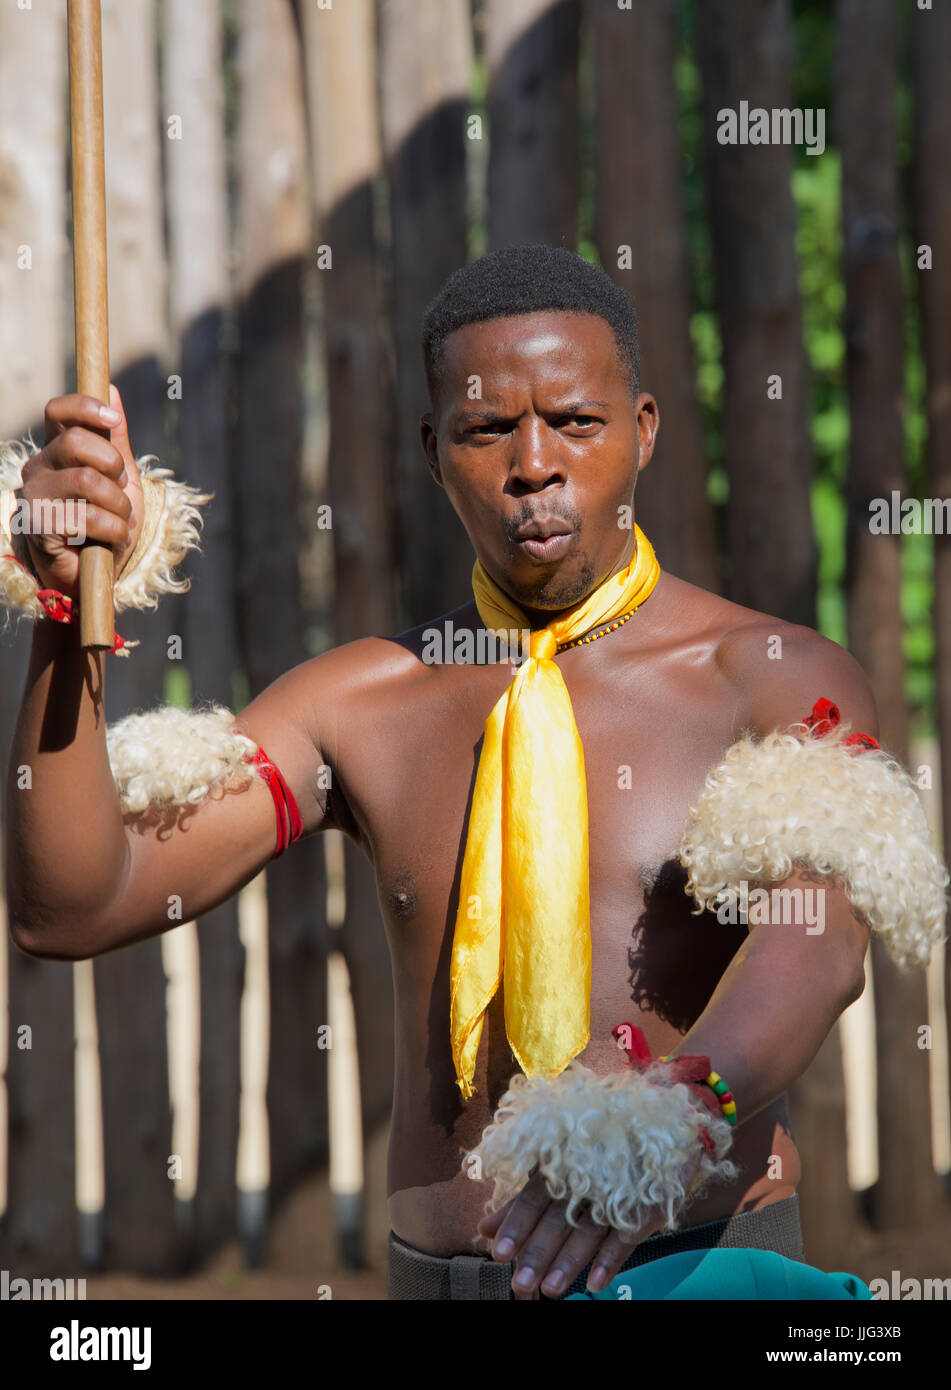 Close-up tribal man performing traditional dance Mantenga Cultural Village Swaziland Southern Africa Stock Photo